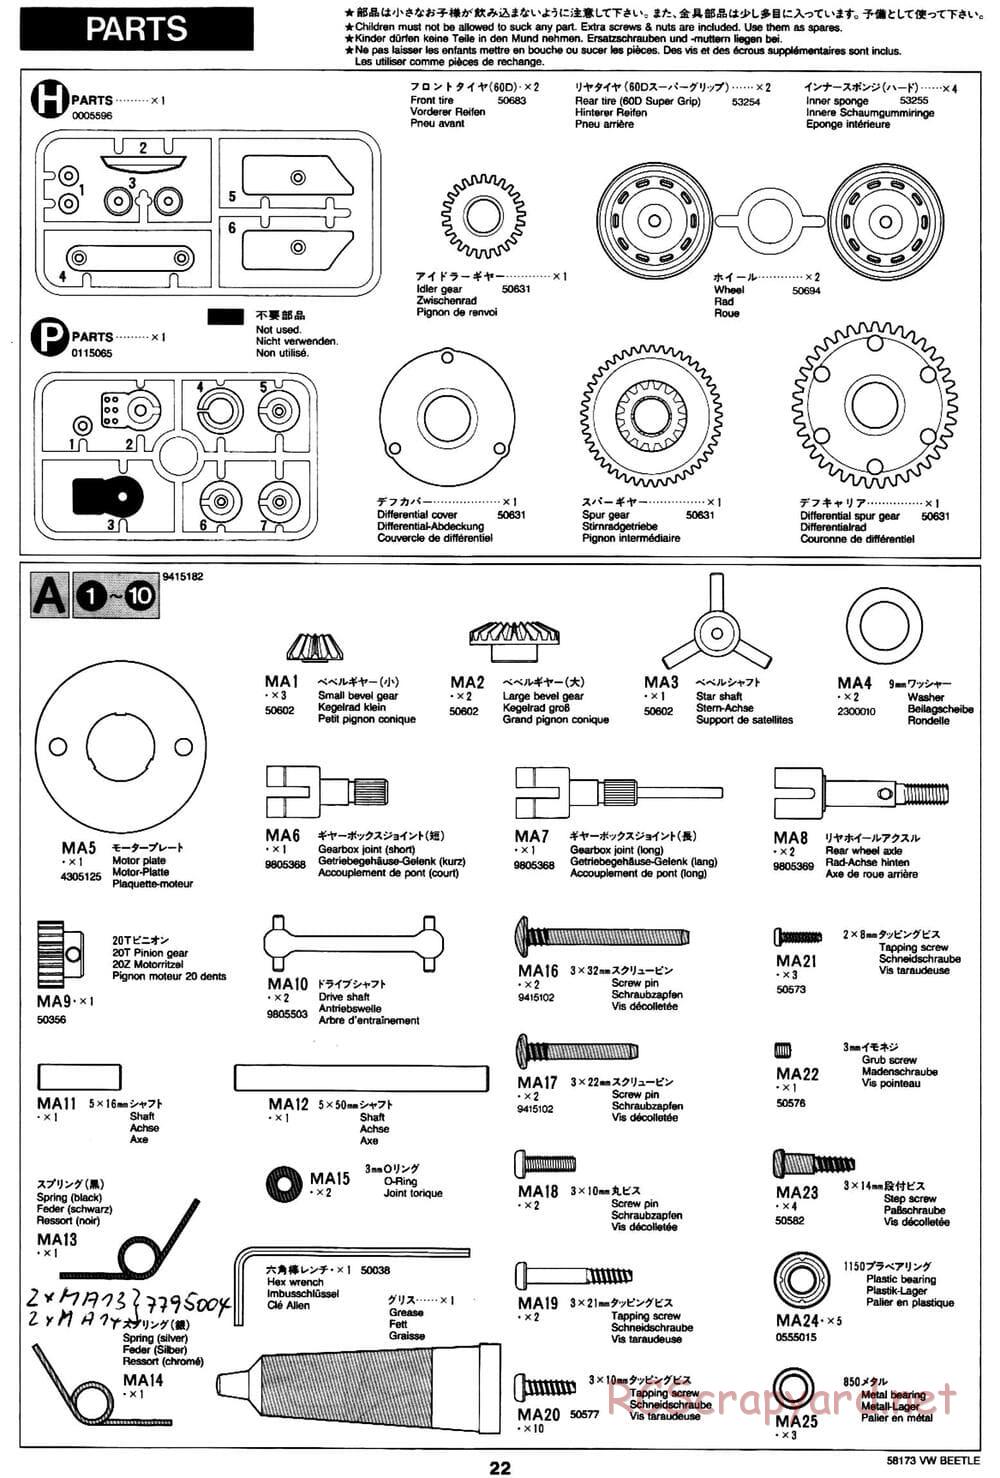 Tamiya - Volkswagen Beetle - M02L Chassis - Manual - Page 22